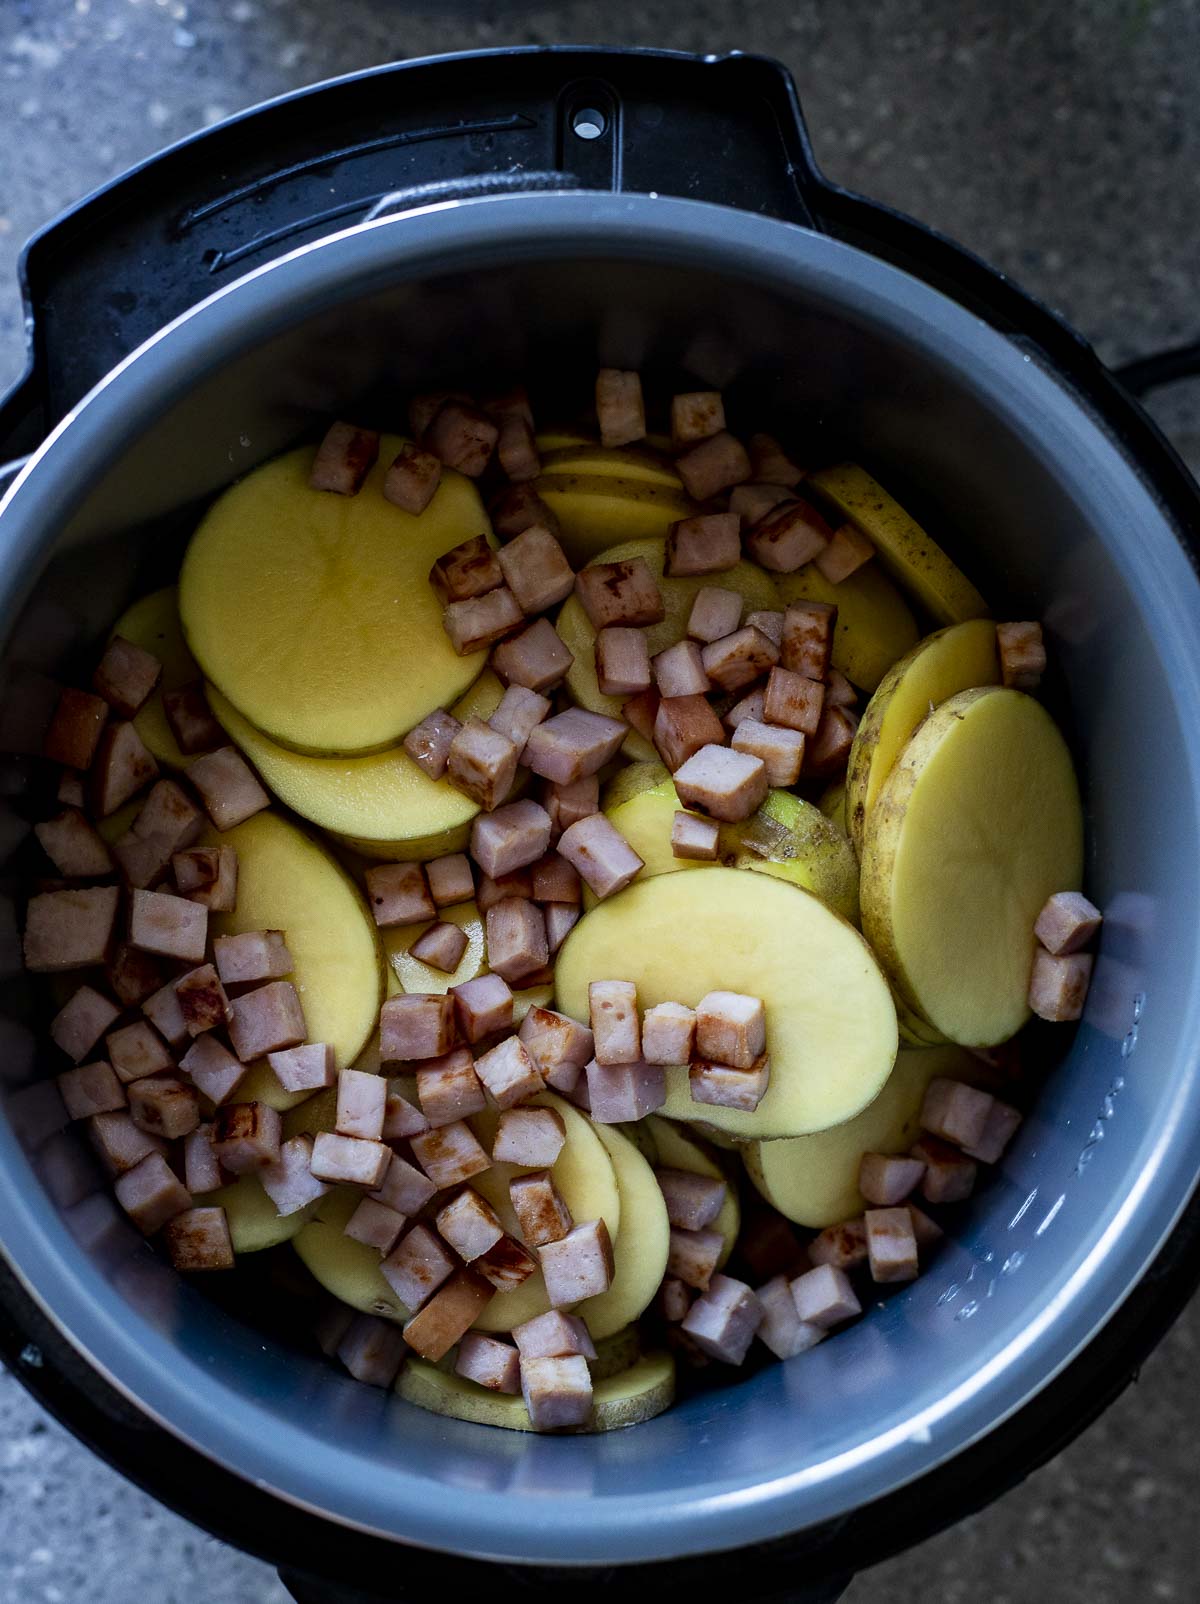 Potato slices and ham added to the Instant Pot.